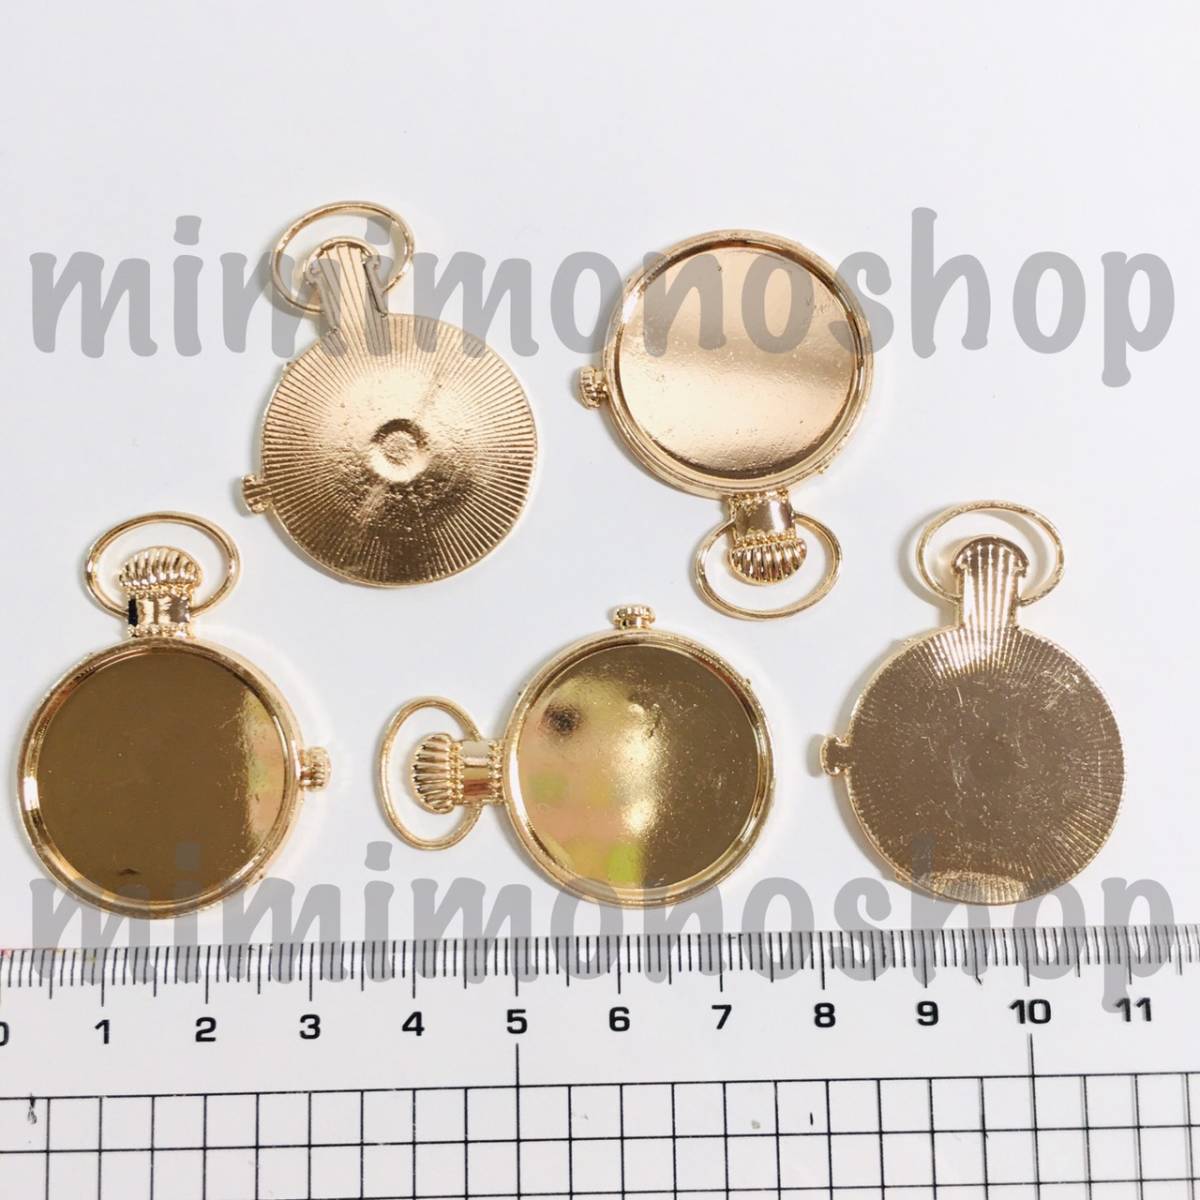 h186 ★New item★Buy it now★Charm [Resin meal plate resin frame / 5 pocket watches / Gold] Handmade metal parts materials ingredients, Handcraft, Handicrafts, Beadwork, Metal parts